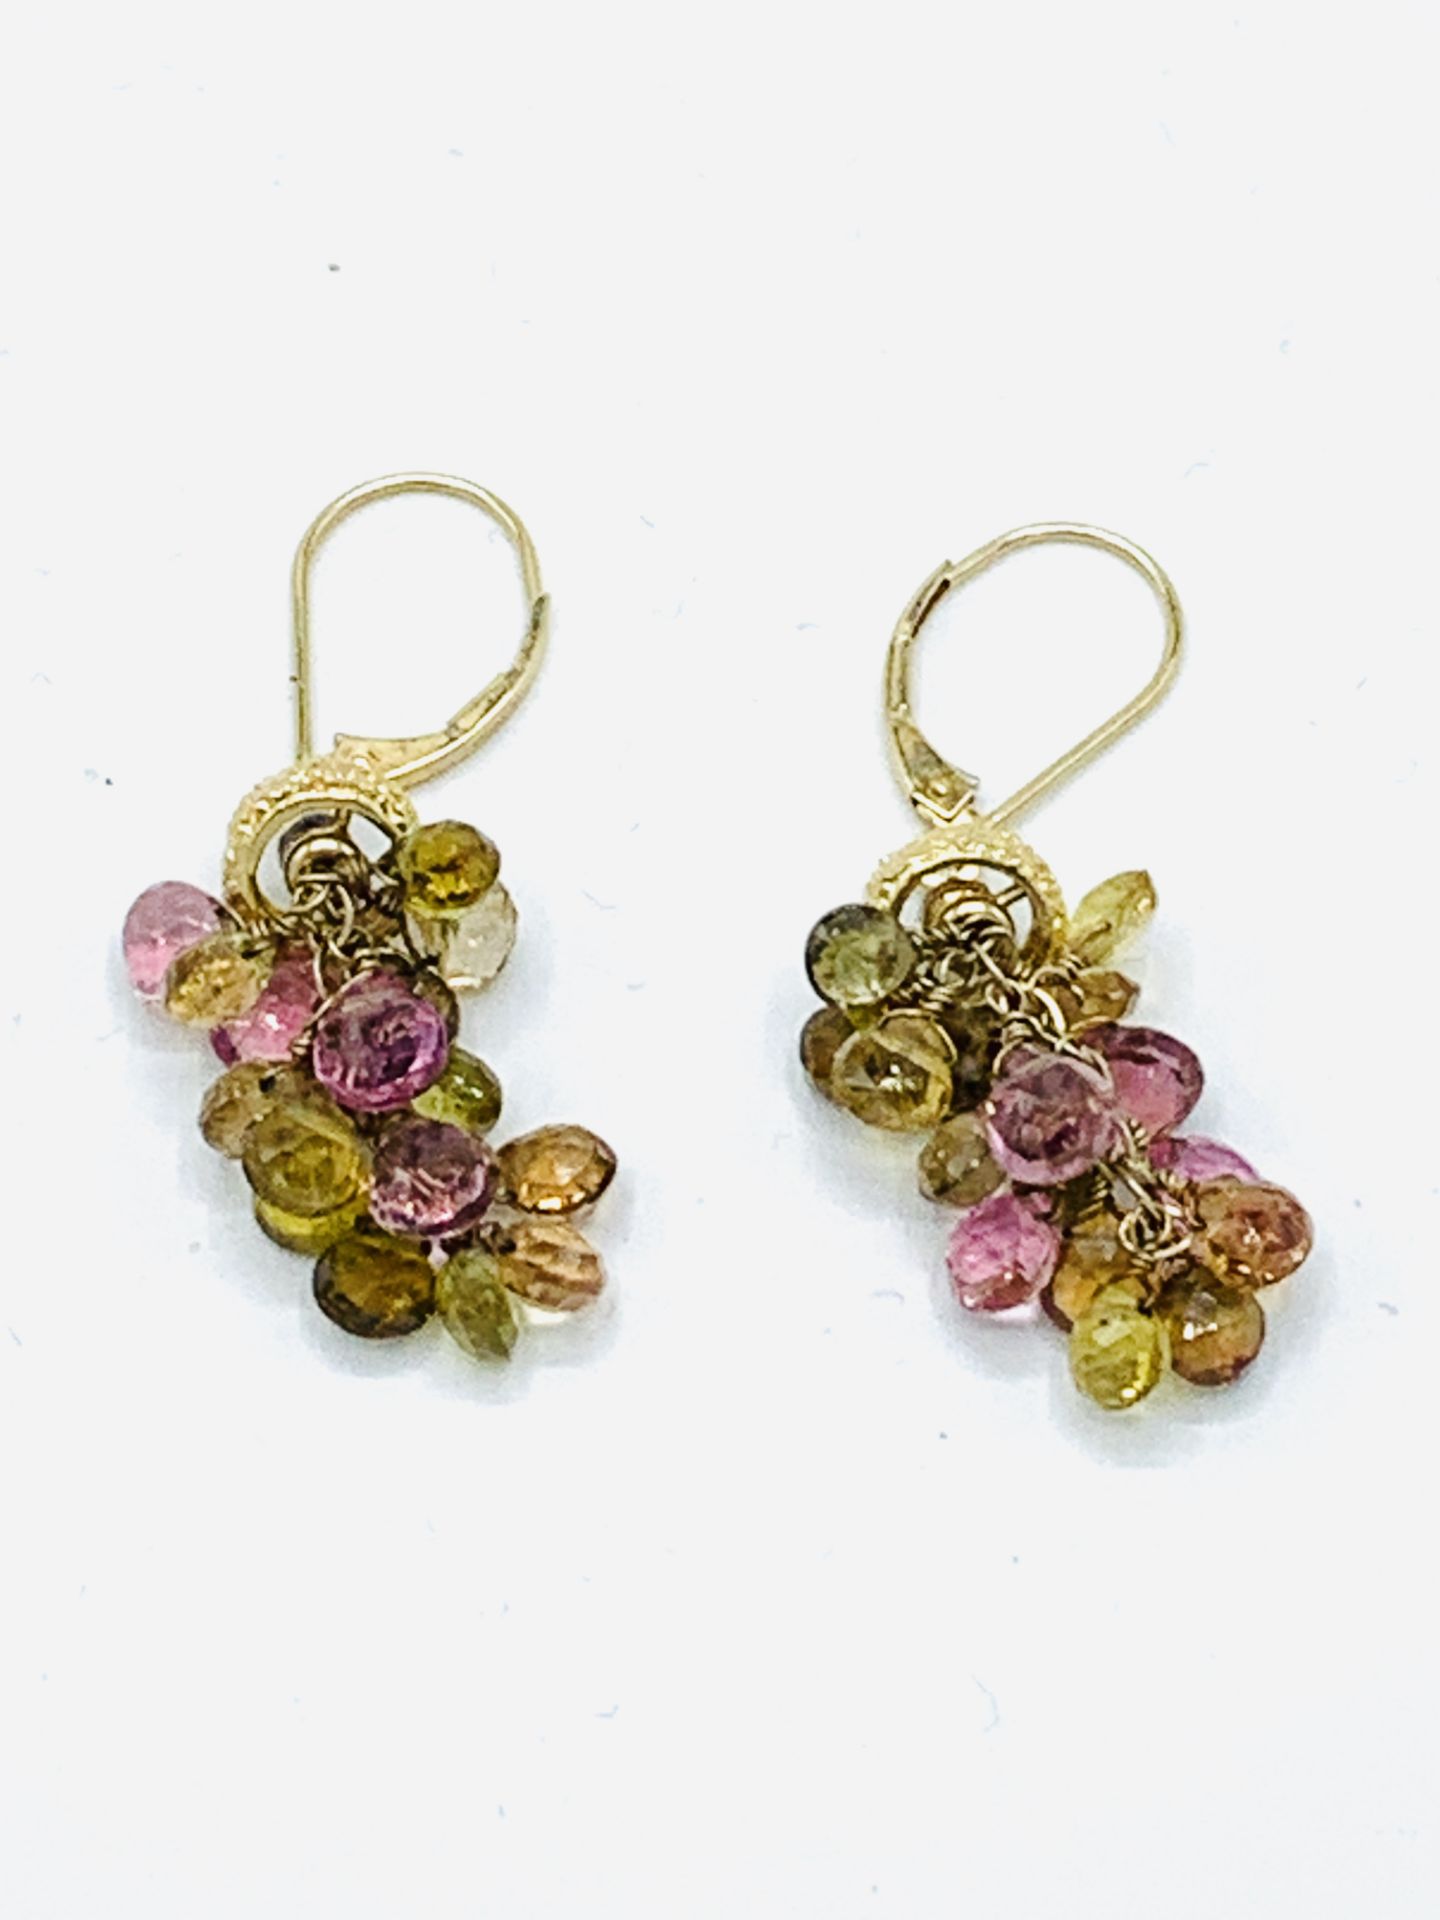 14ct yellow gold and gemstone drop earrings